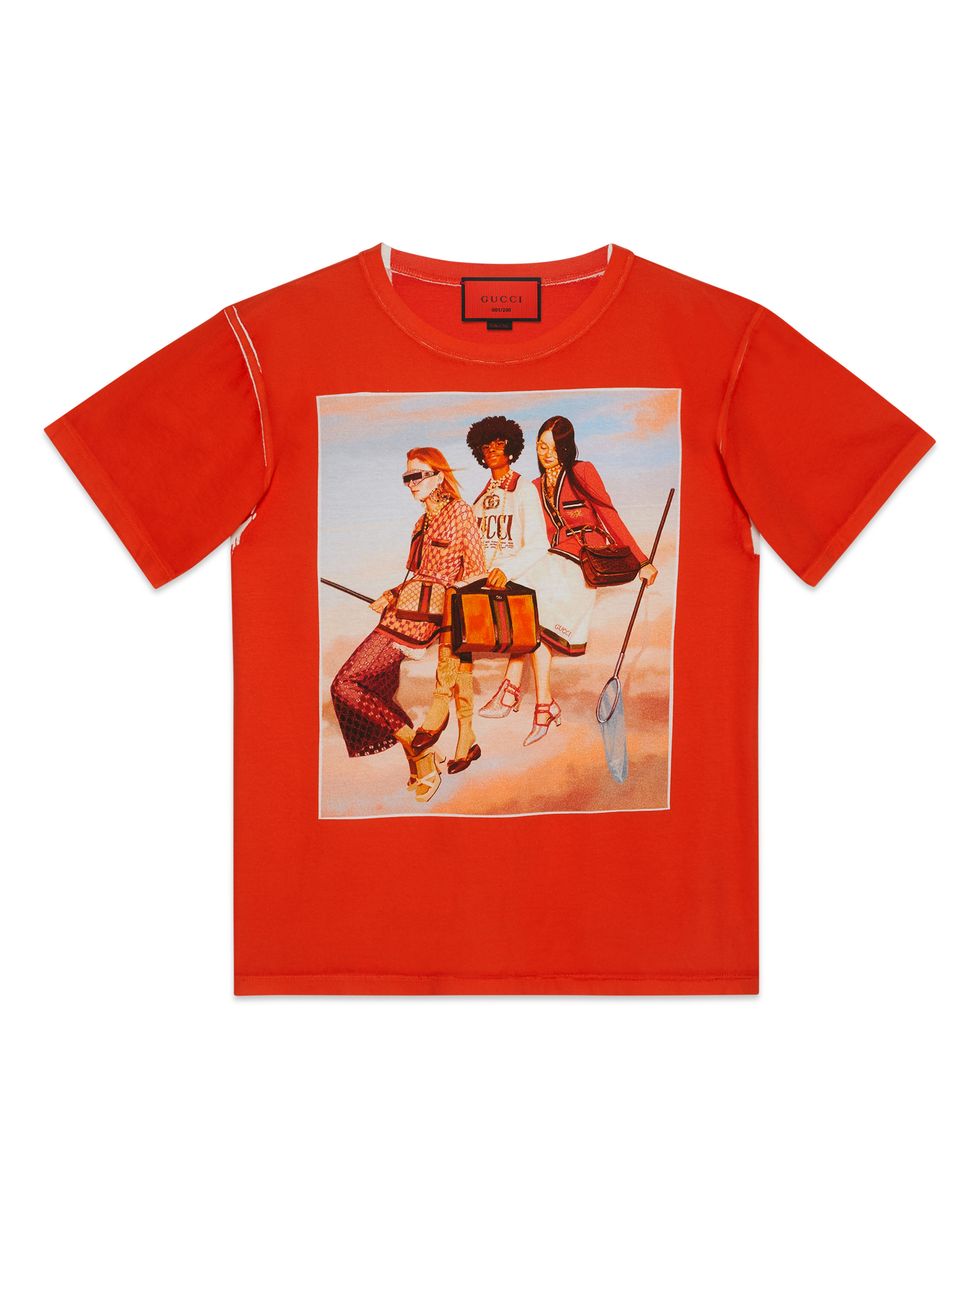 T-shirt, Clothing, Product, Orange, Red, Sleeve, Top, Font, Jersey, Active shirt, 